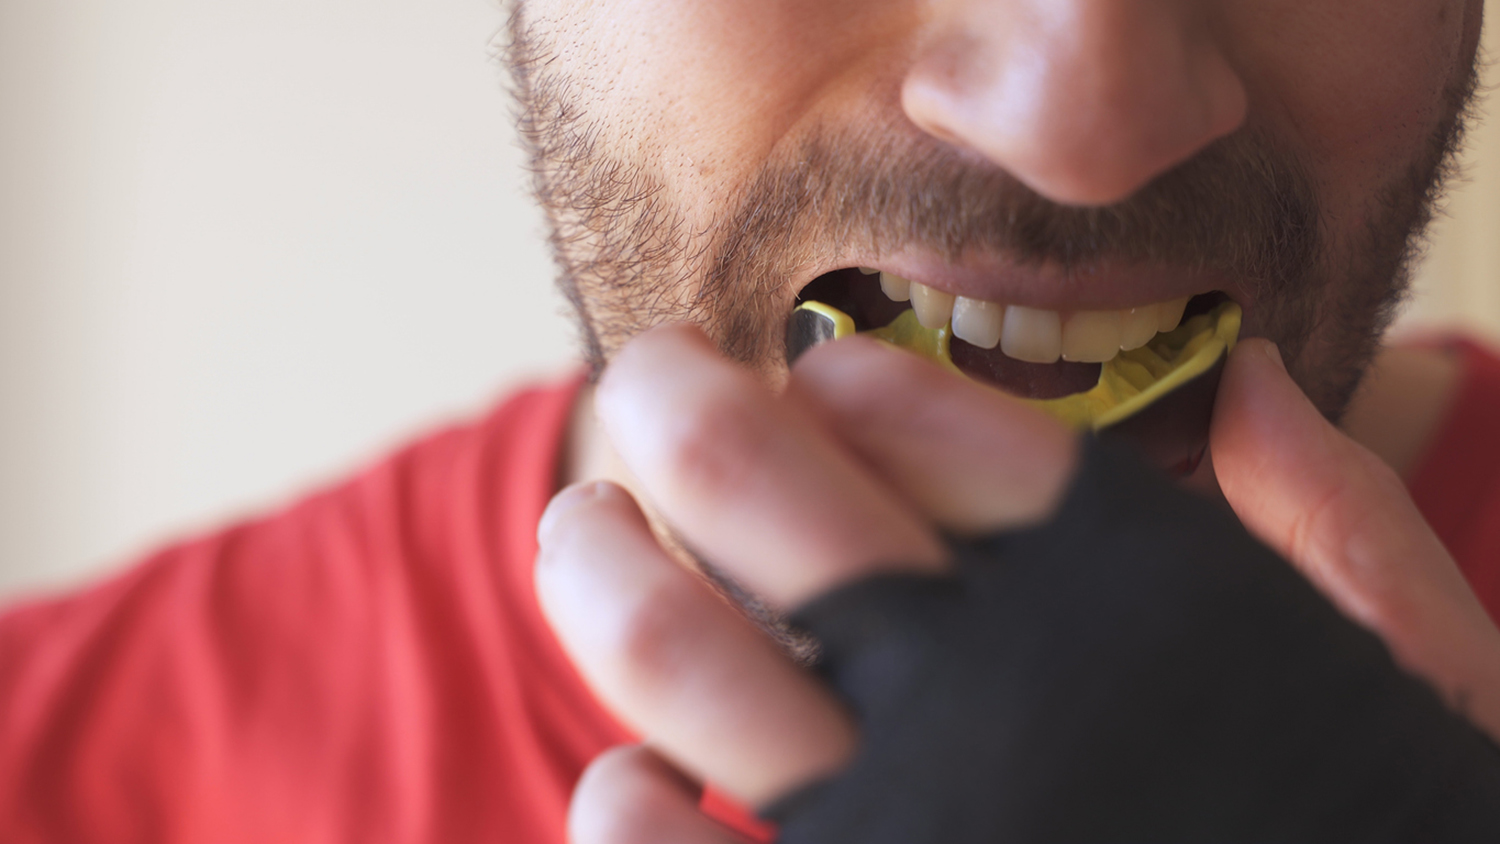 Young male putting in professional mouthguard before boxing sparring training